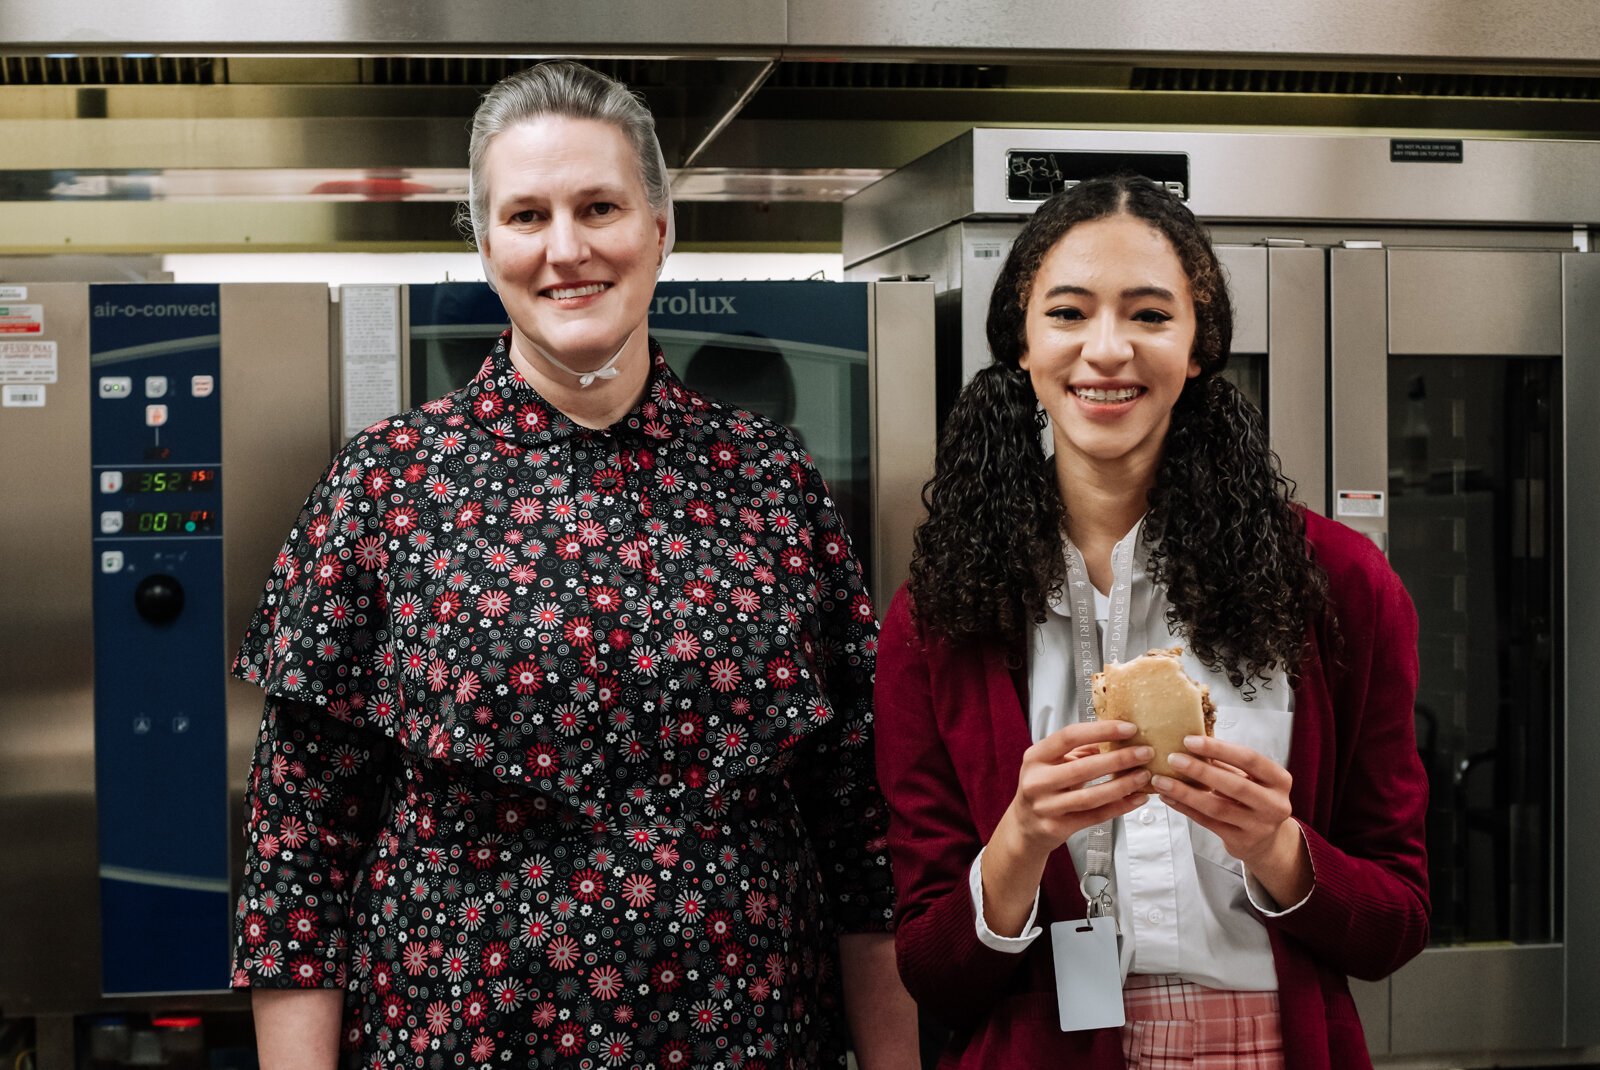 Becky Landes, Food Service Operation Manager, left, enjoys preparing locally sourced meals for students at Manchester Junior-Senior High School, like Senior Morgan Metzger, right.